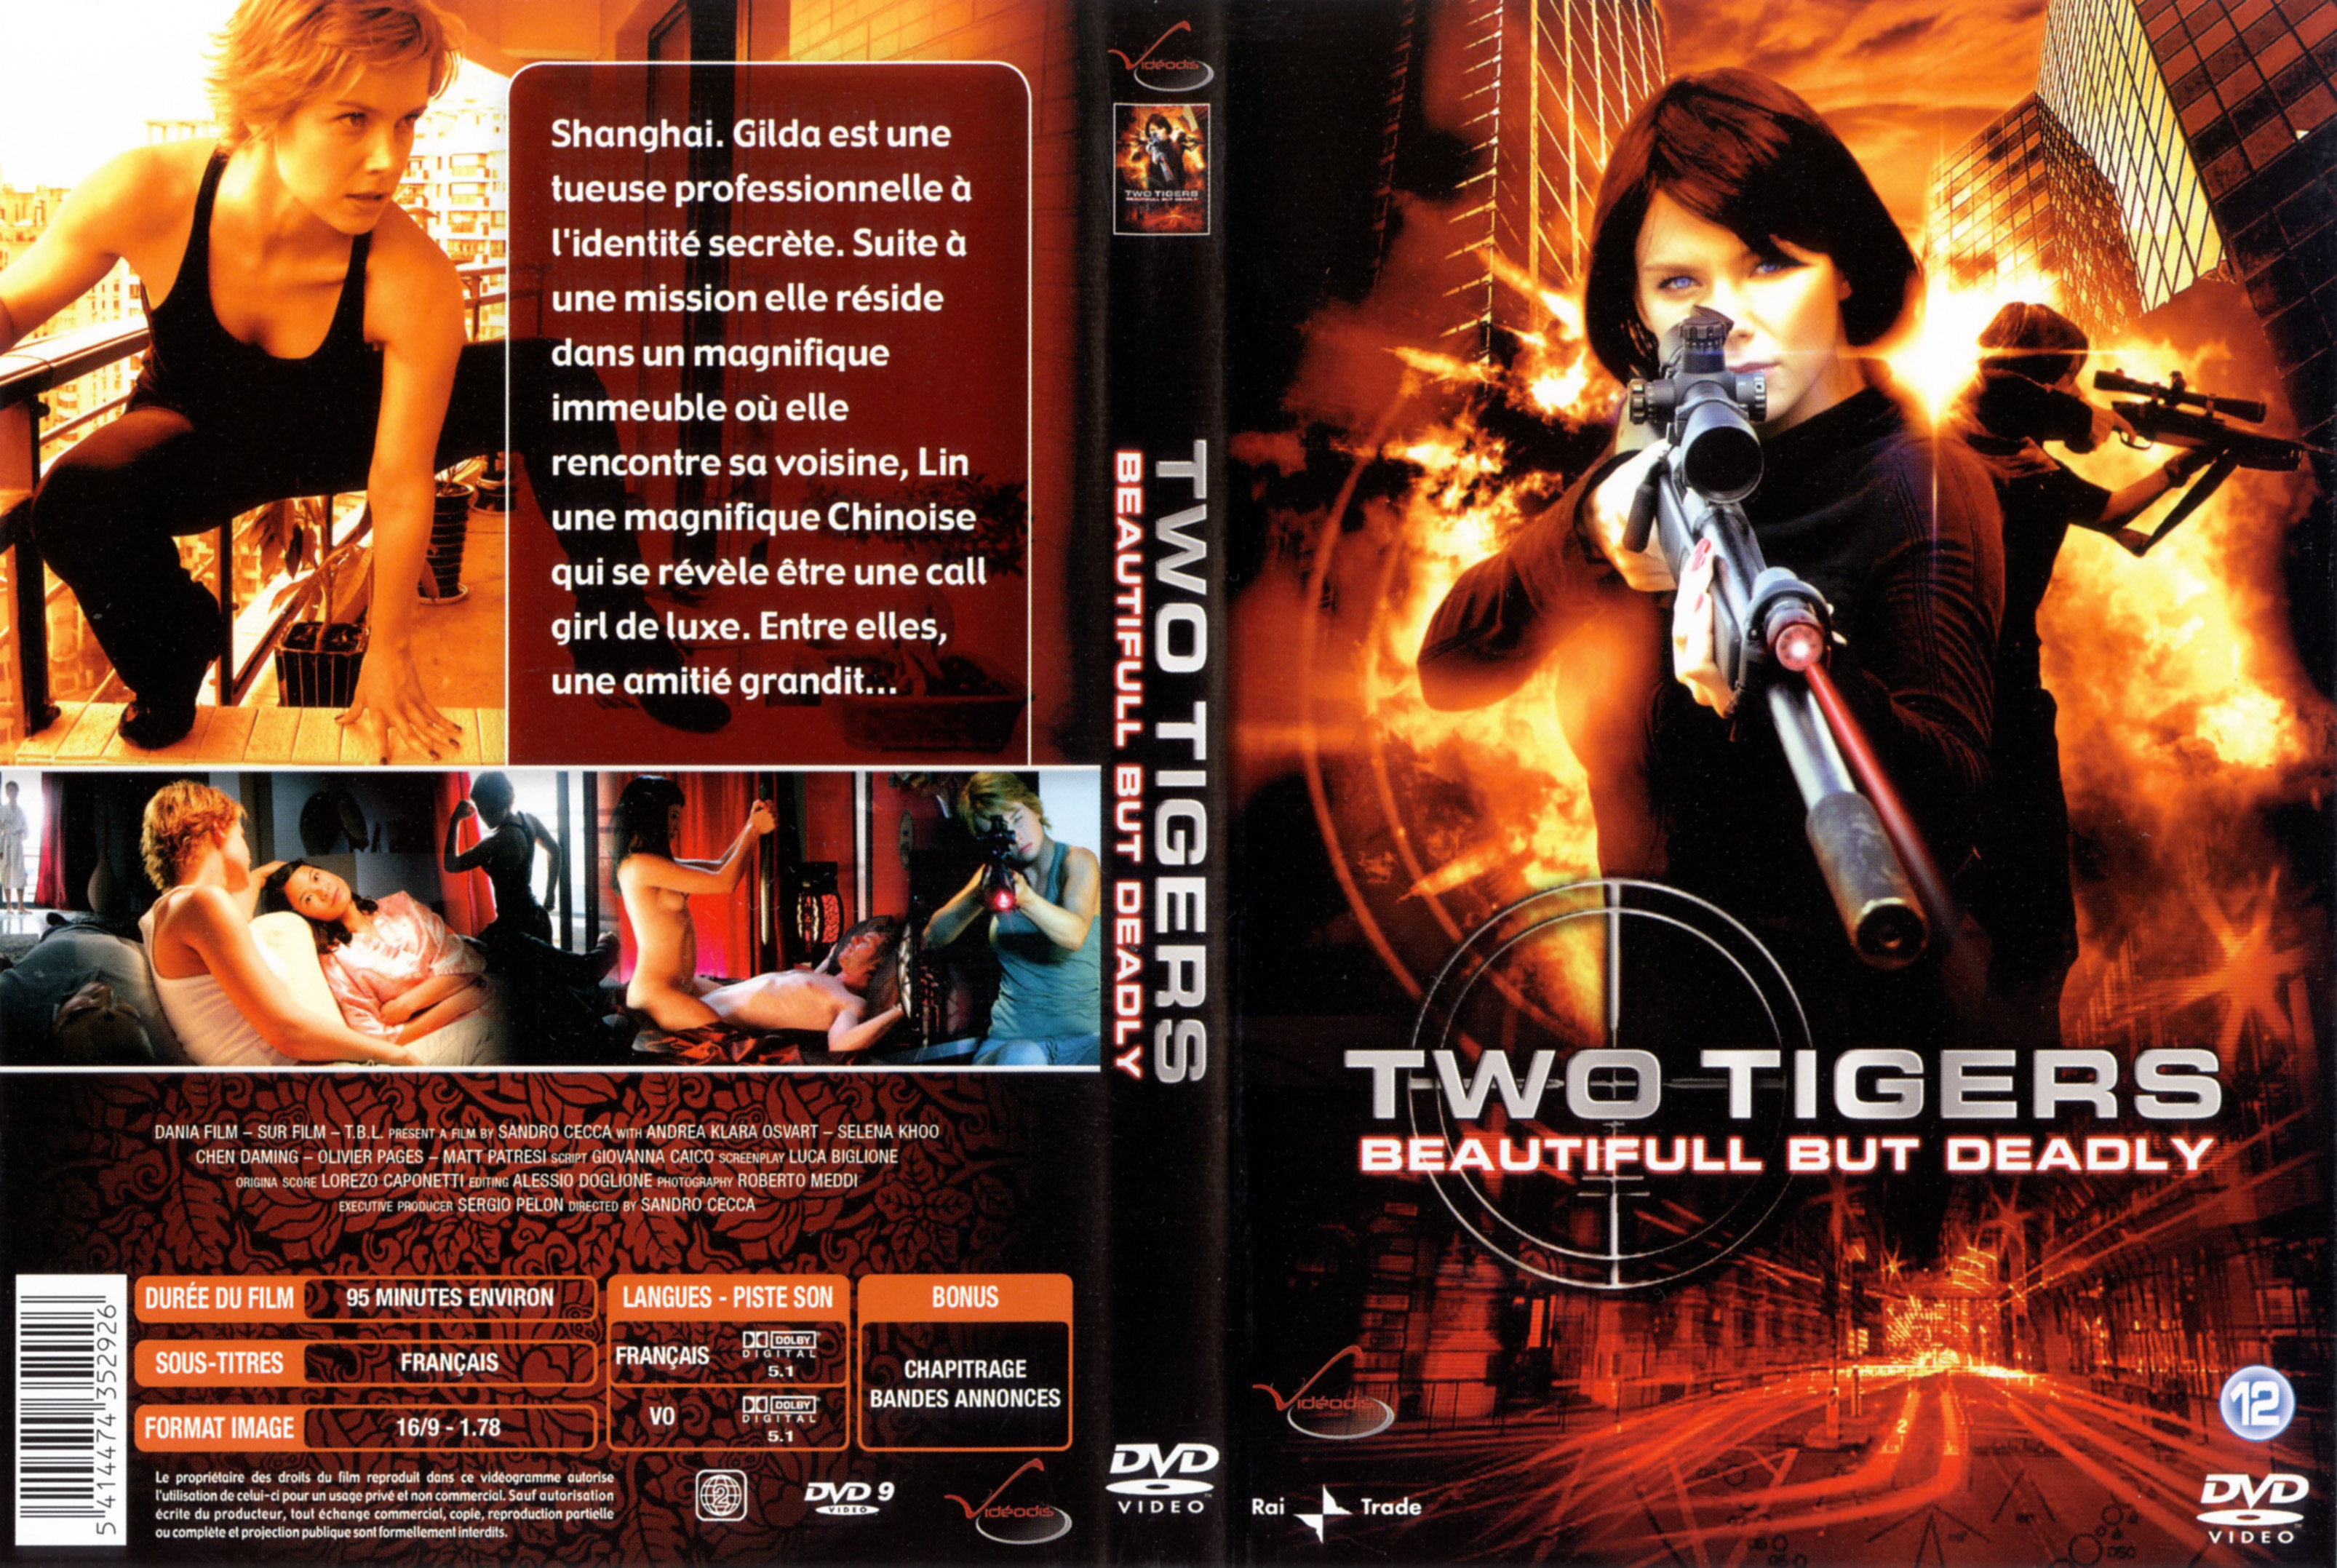 Jaquette DVD Two Tigers